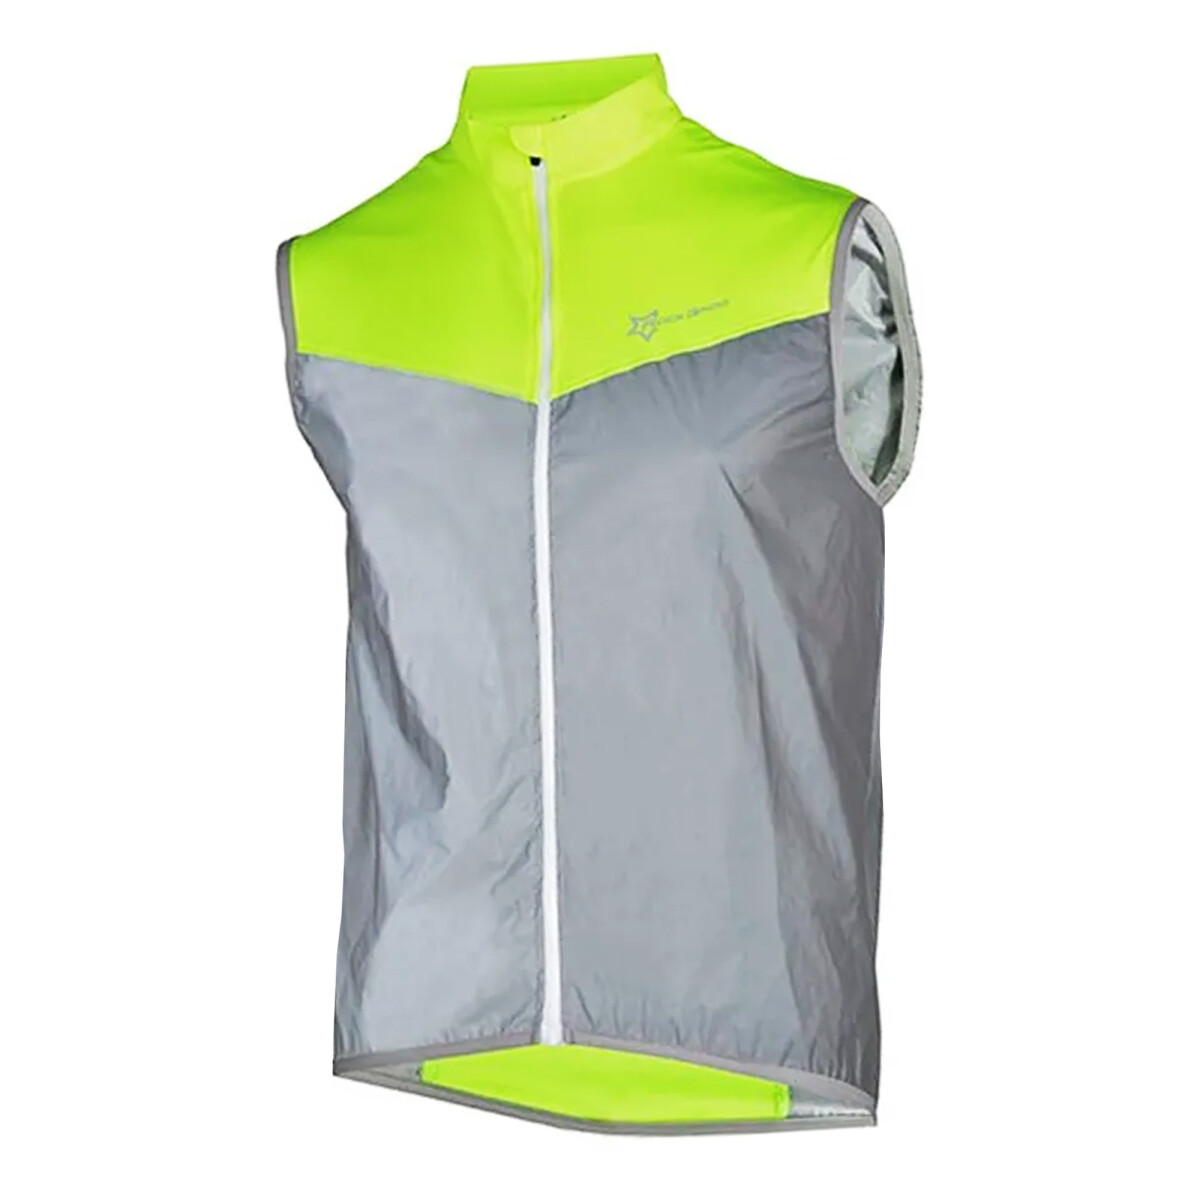 Rockbros - Chaleco Ciclista Unisex FGY1001 - Reflectante. Impermeable. Rompeviento. 2XL. - 001 